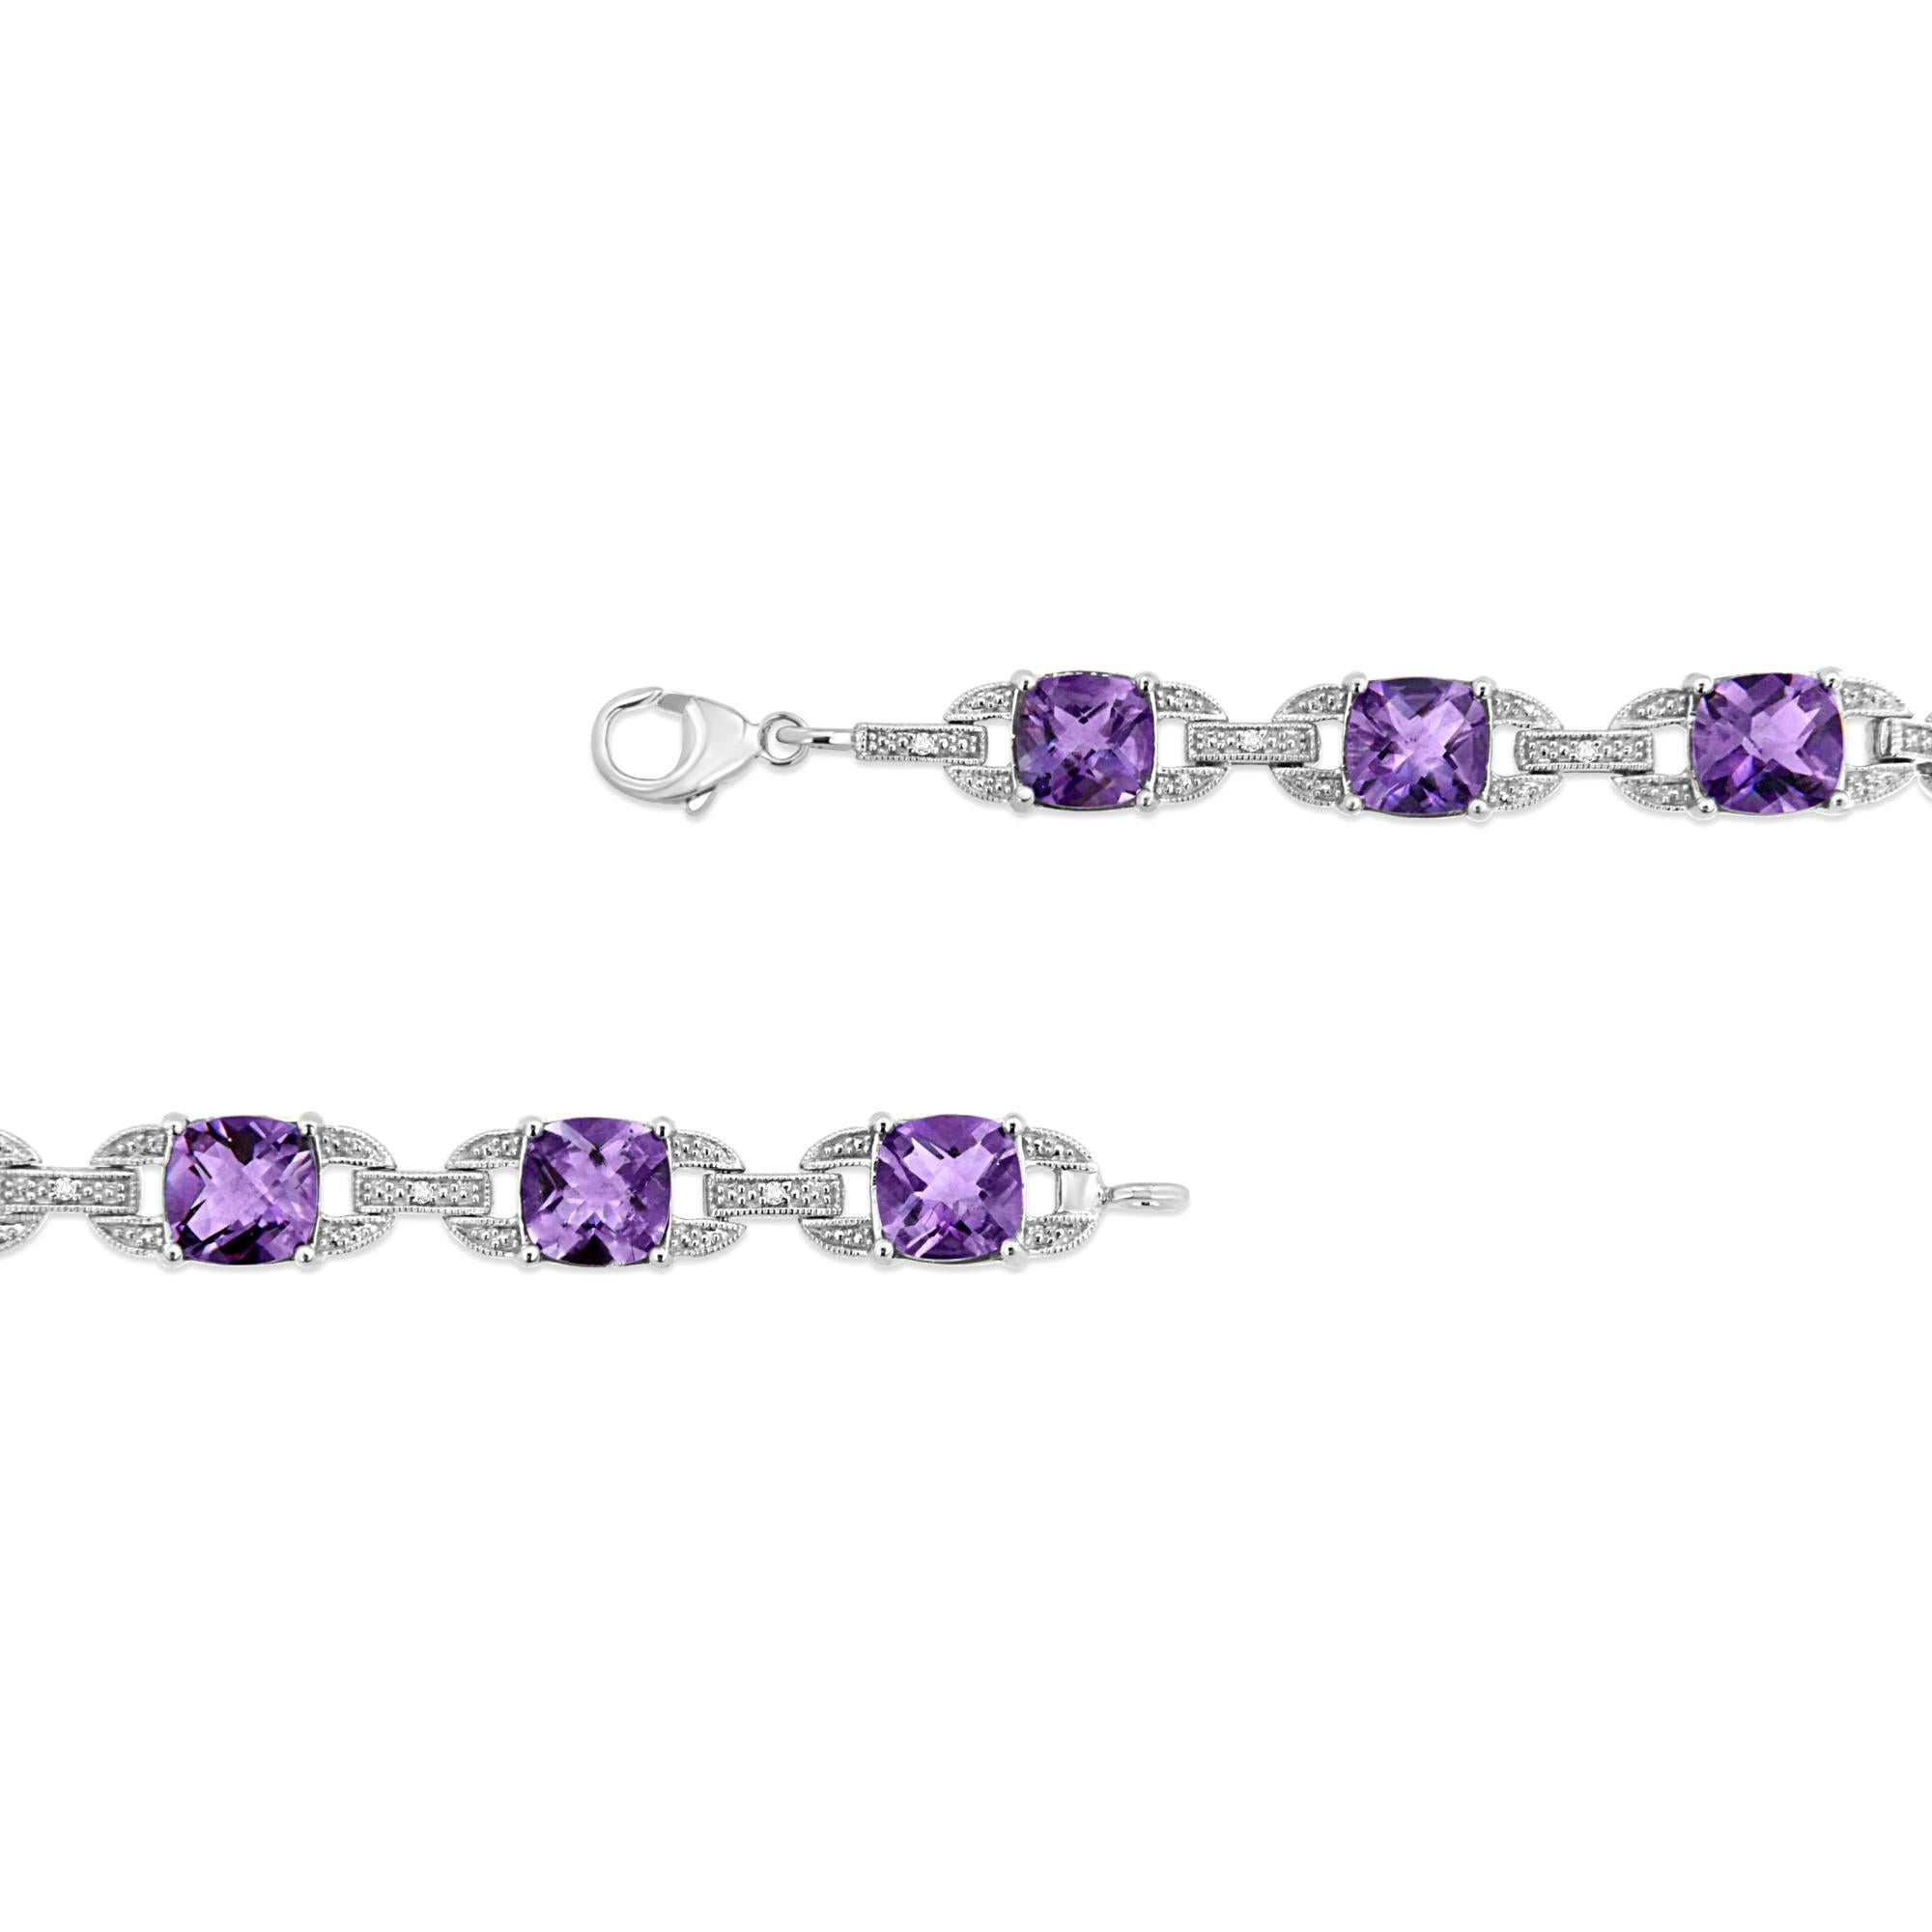 Cushion Cut Antique Amethyst and Diamond Bracelet 15 Carats Carats Sterling Silver For Sale